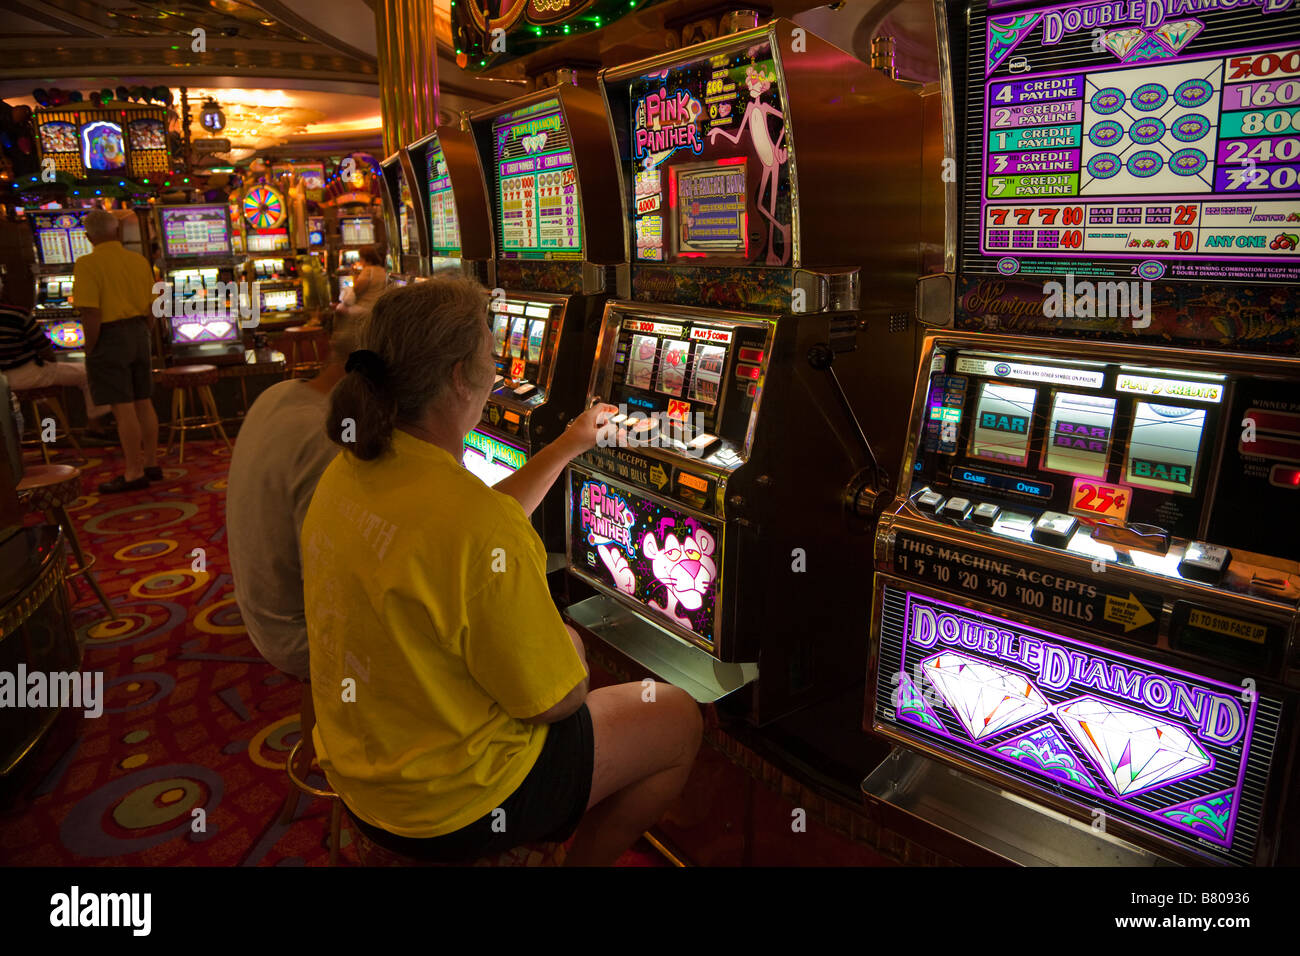 How to play slot machines on cruise ships